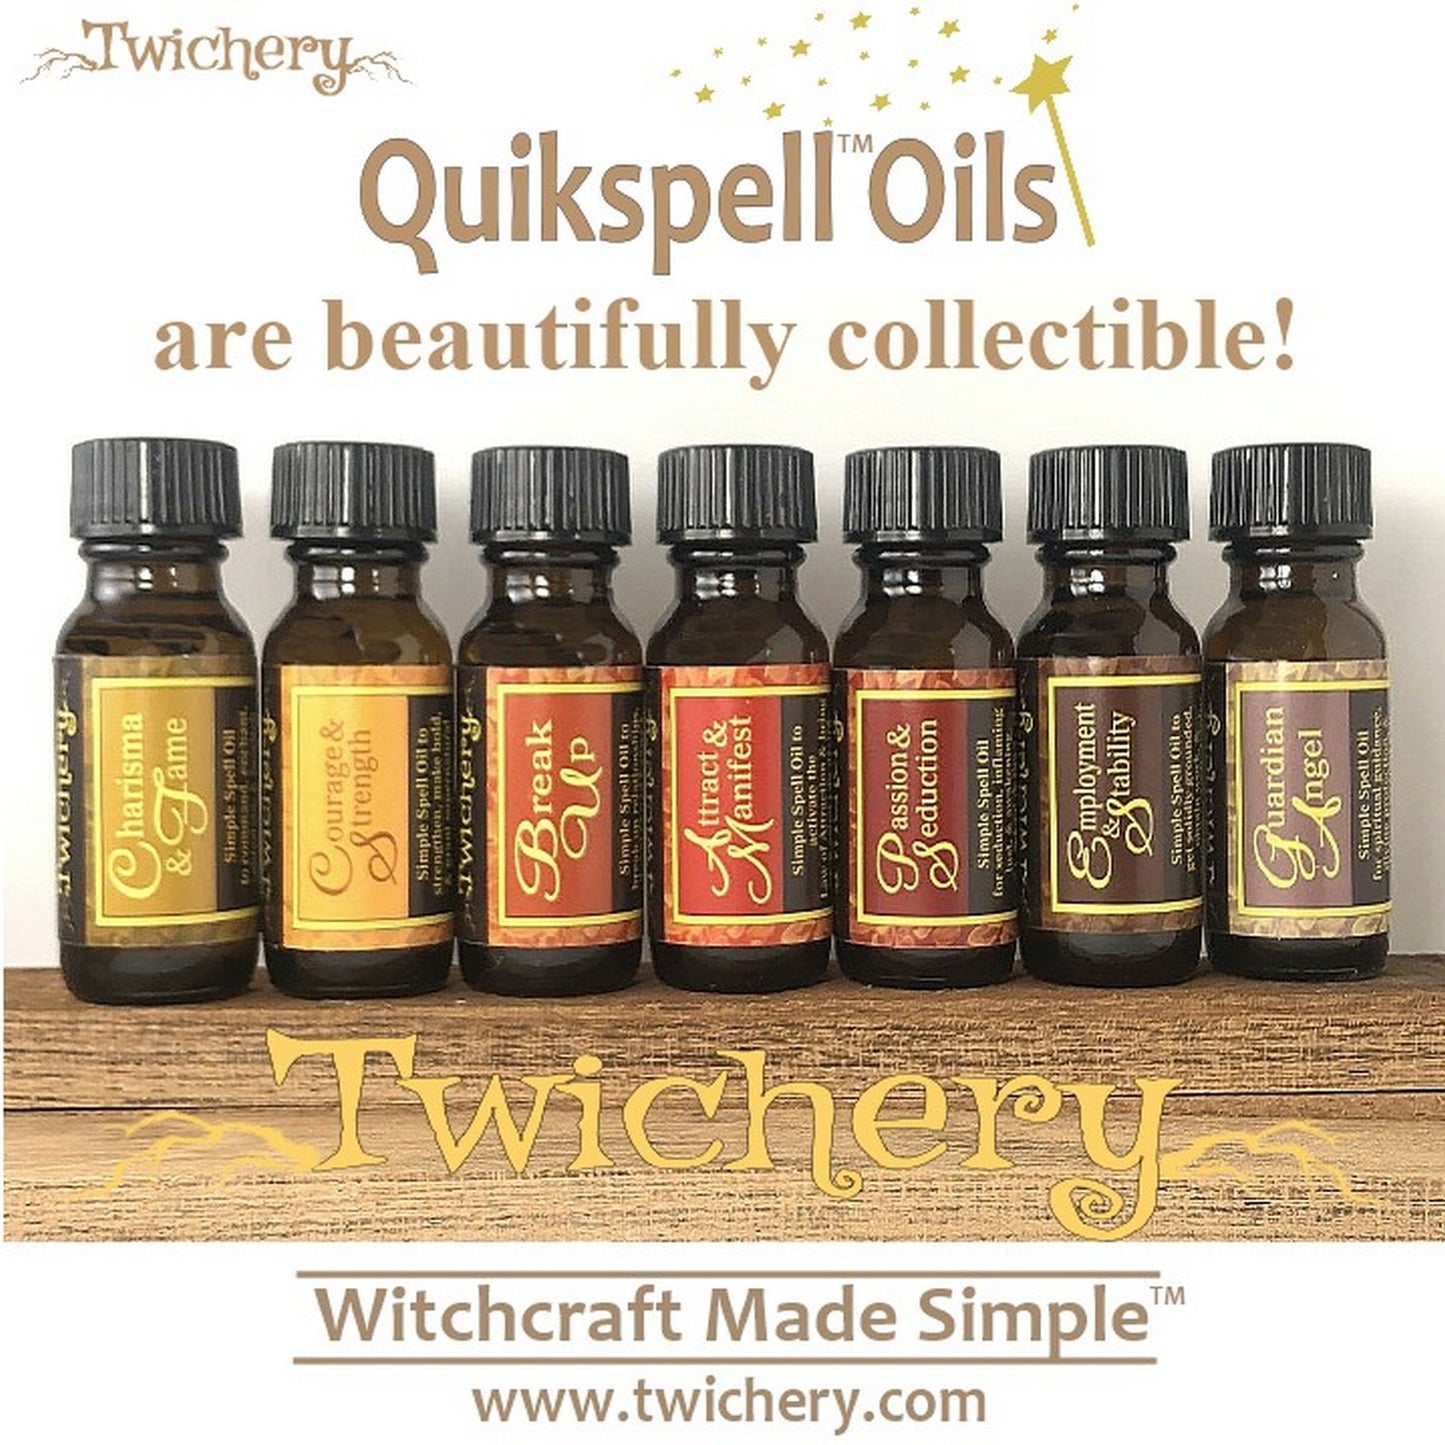 Collect all 24 Twichery Quikspell Oils, including your Reversing & Karma Quikspell Oil for returning curses right to where they came from. Witchcraft Made Simple. Hoodoo voodoo, wicca, pagan